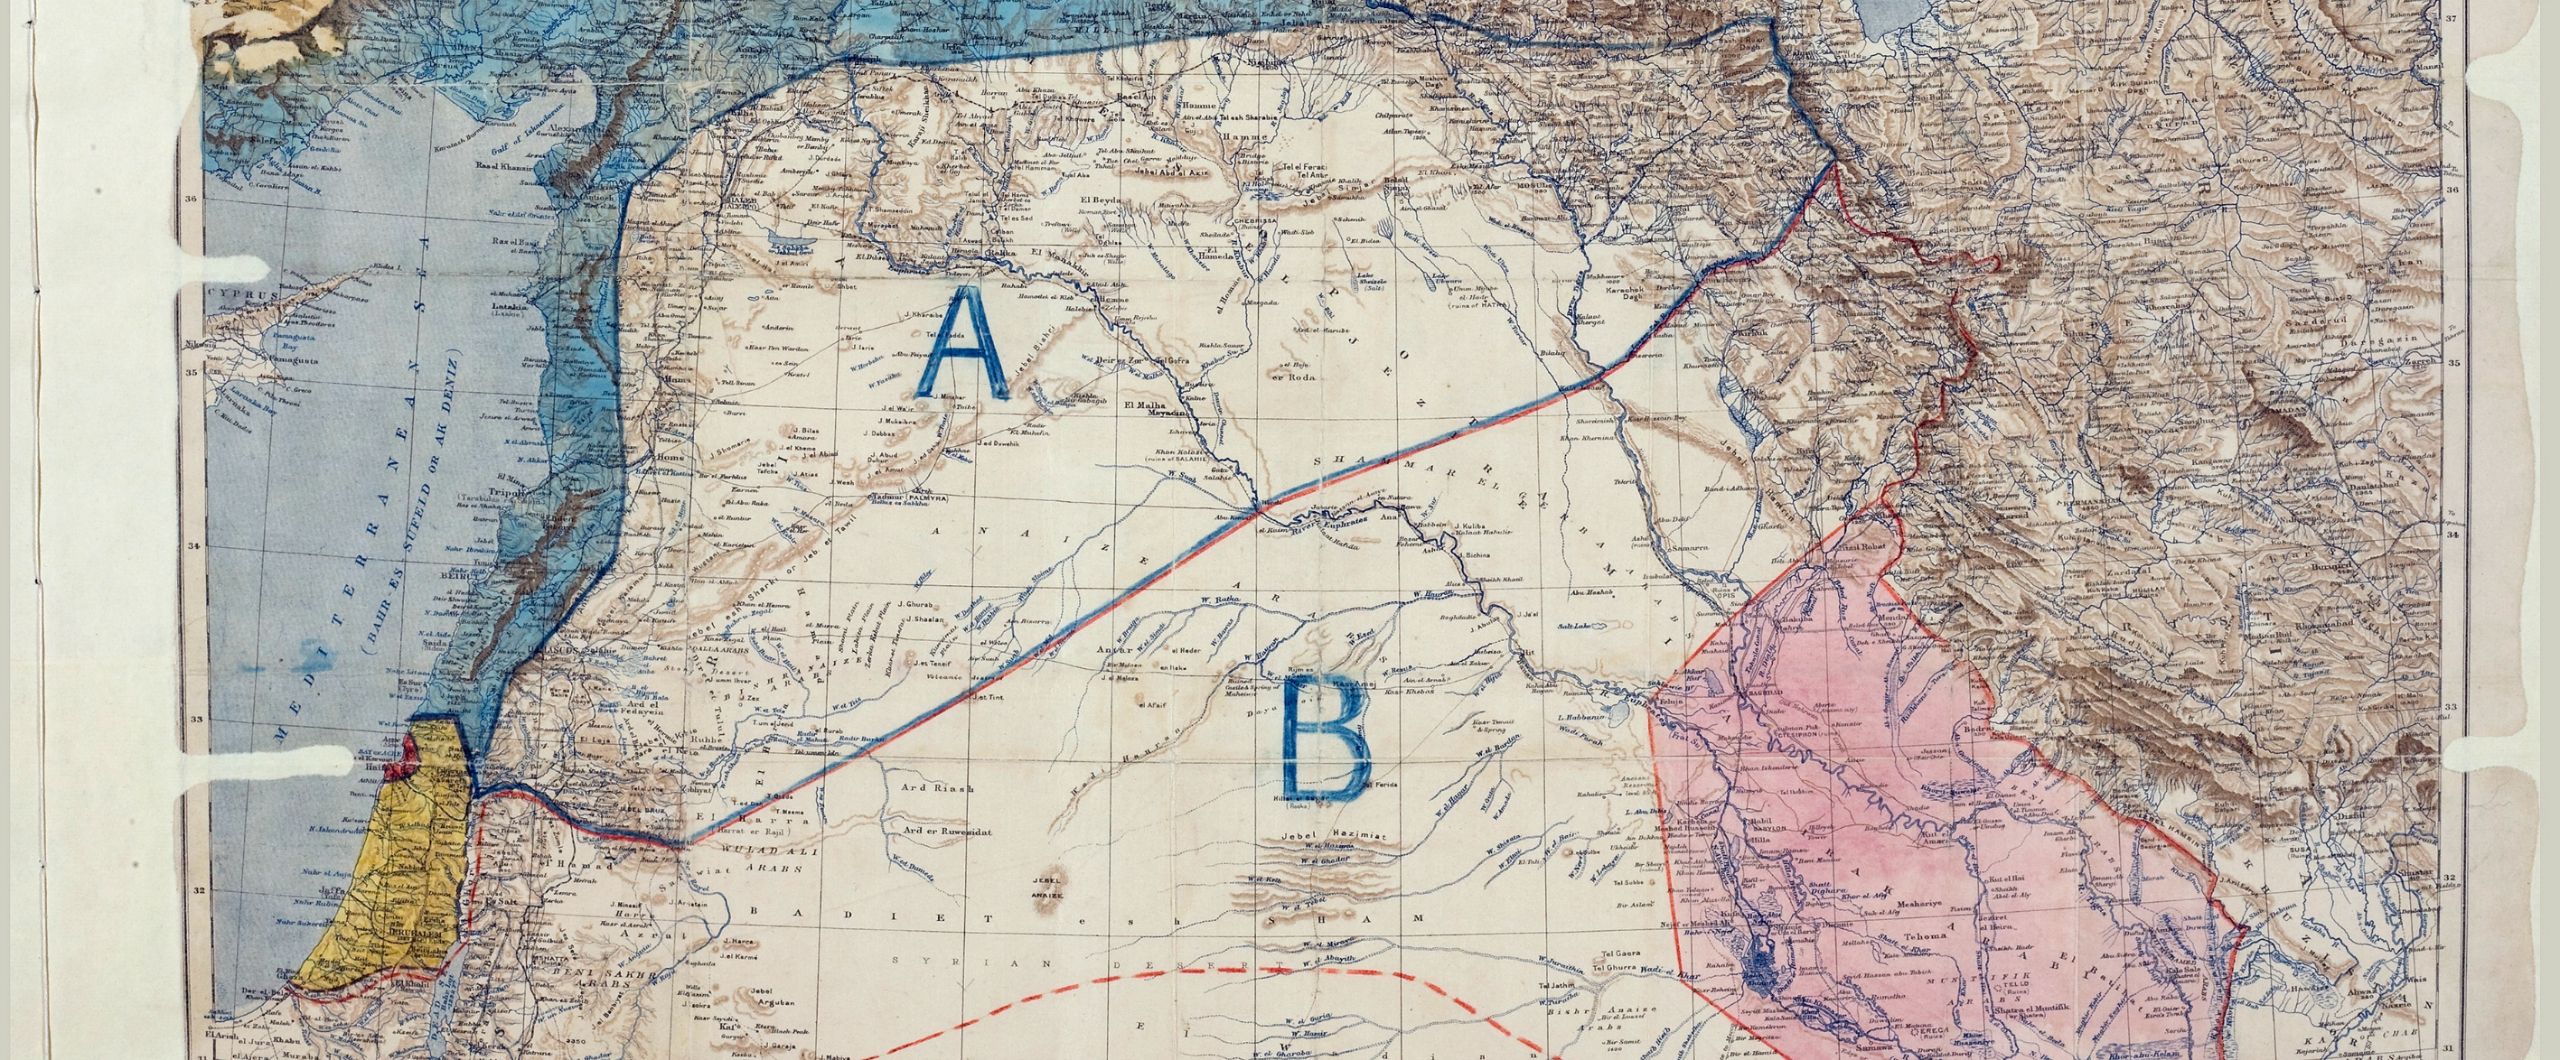 Sykes-Picot Agreement, Map, History, & Facts